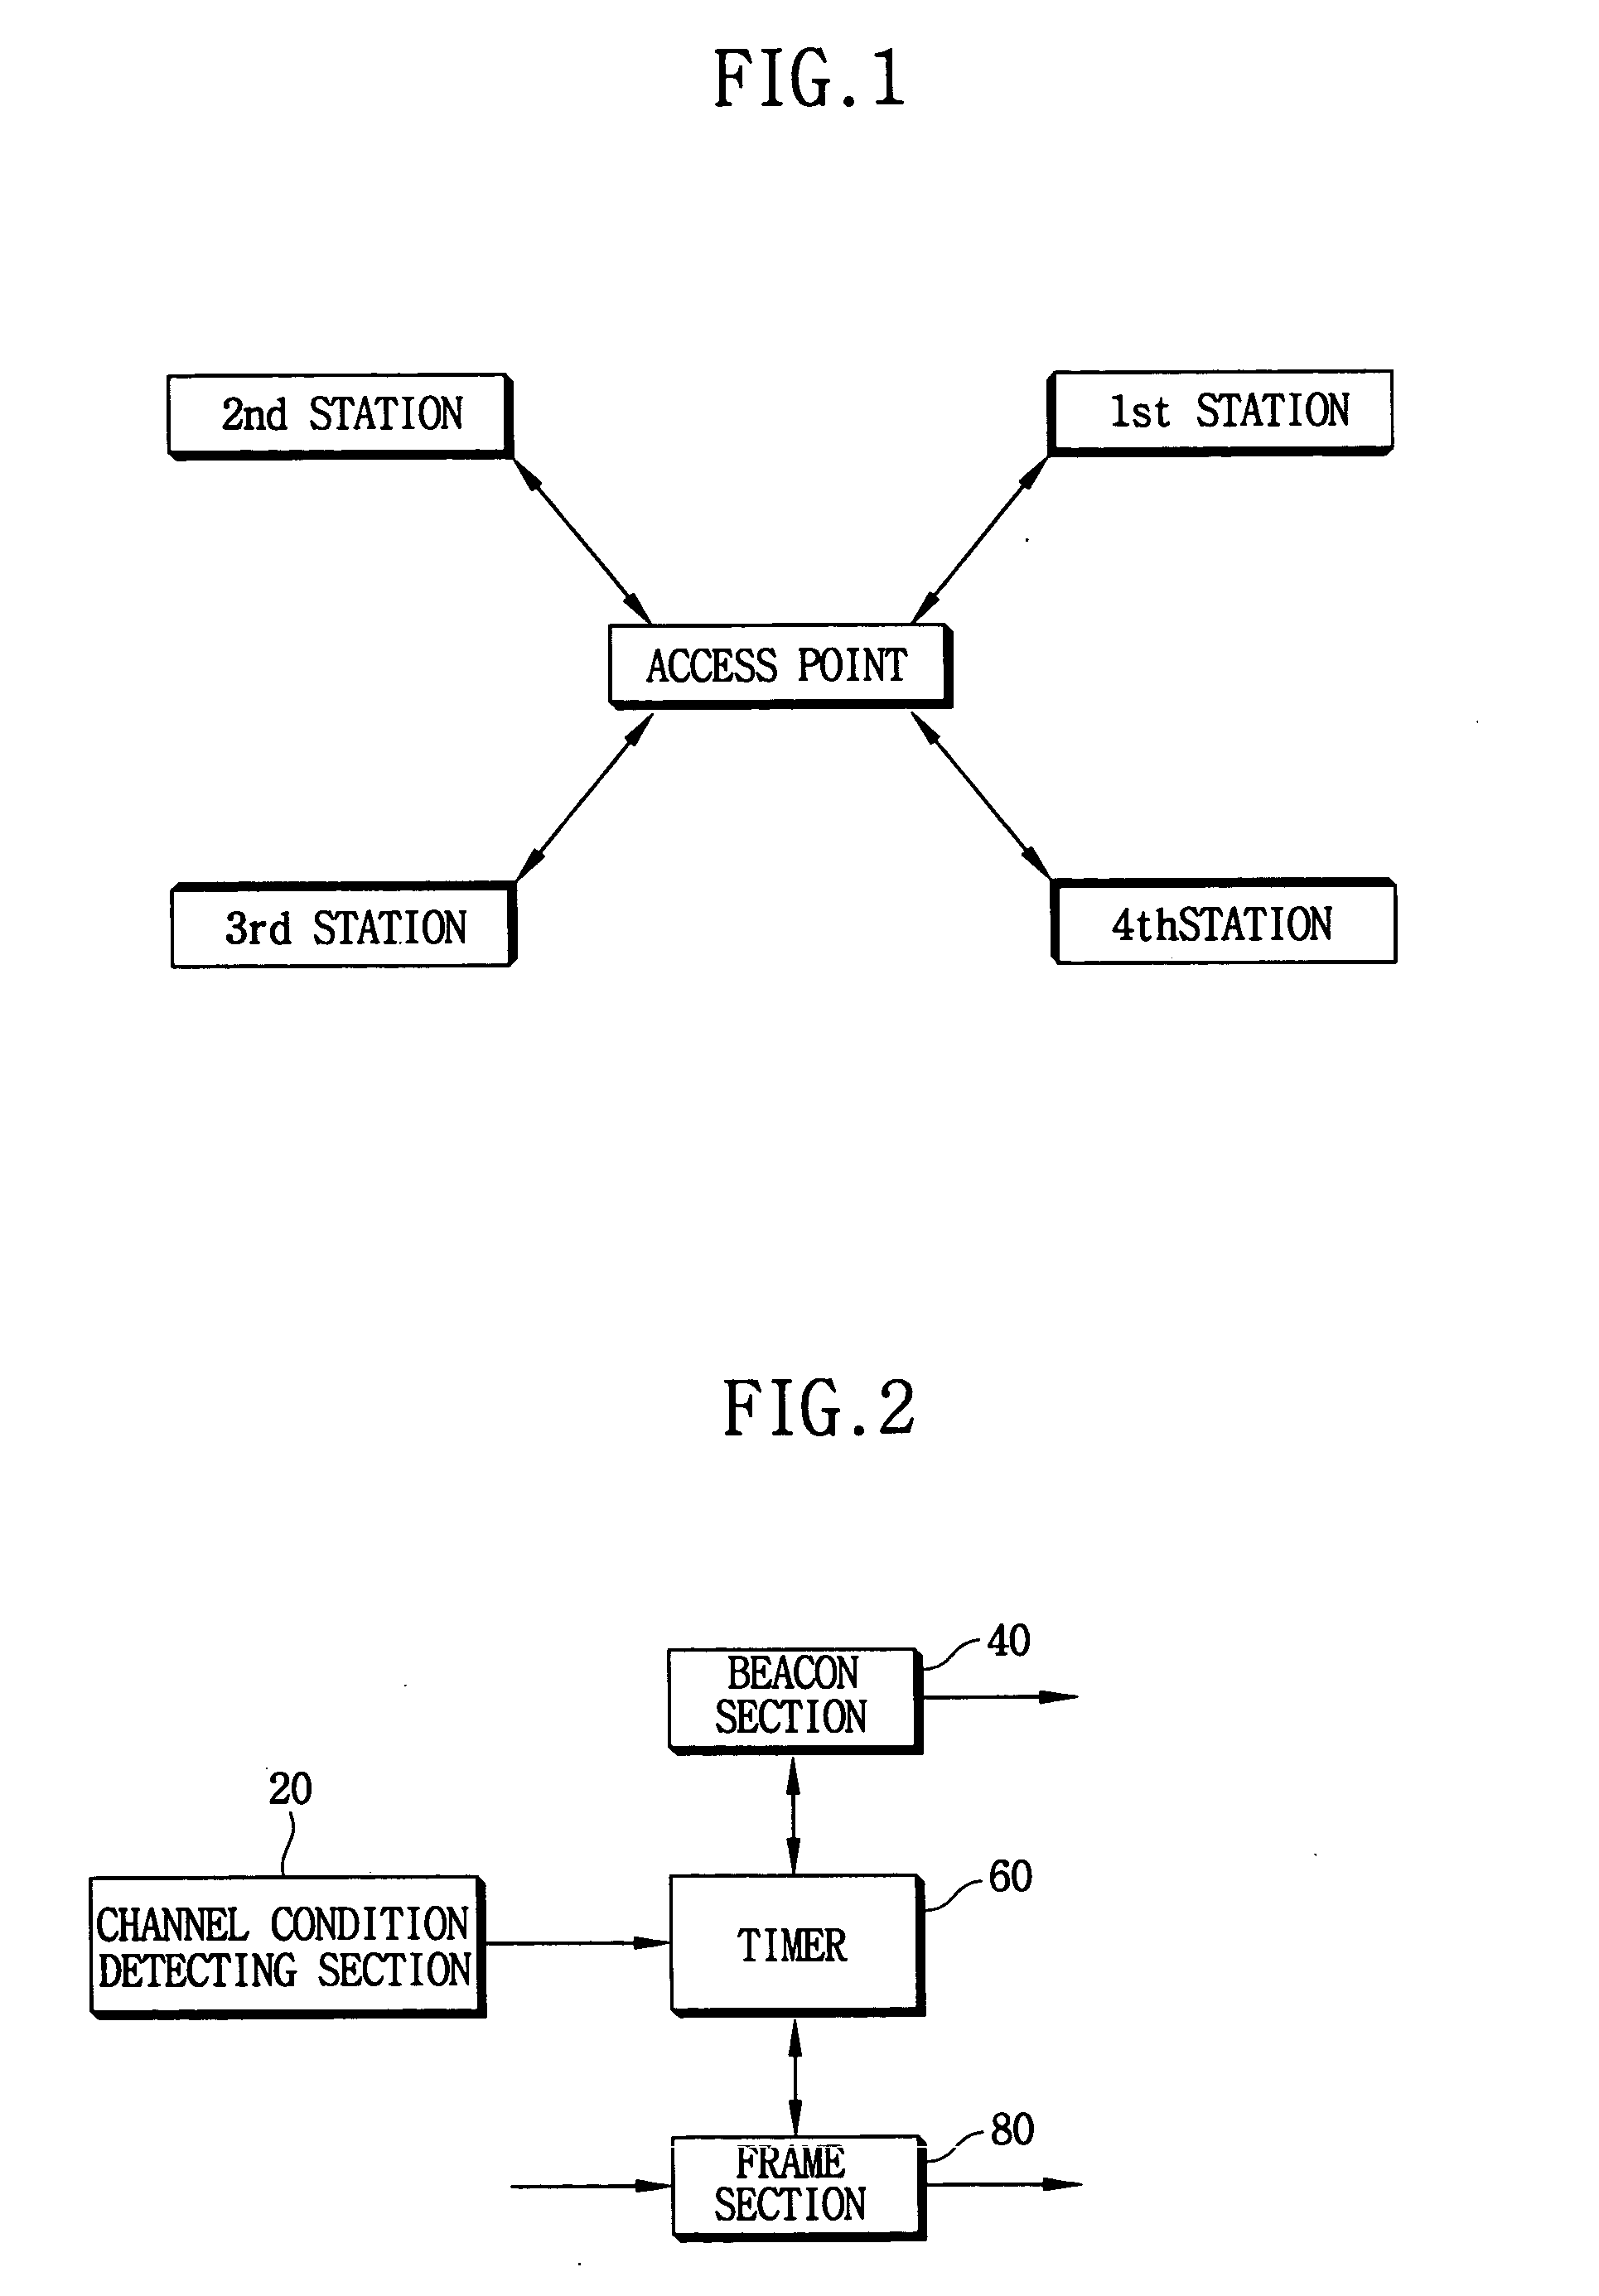 Method and apparatus for transmitting a beacon and communicating a frame